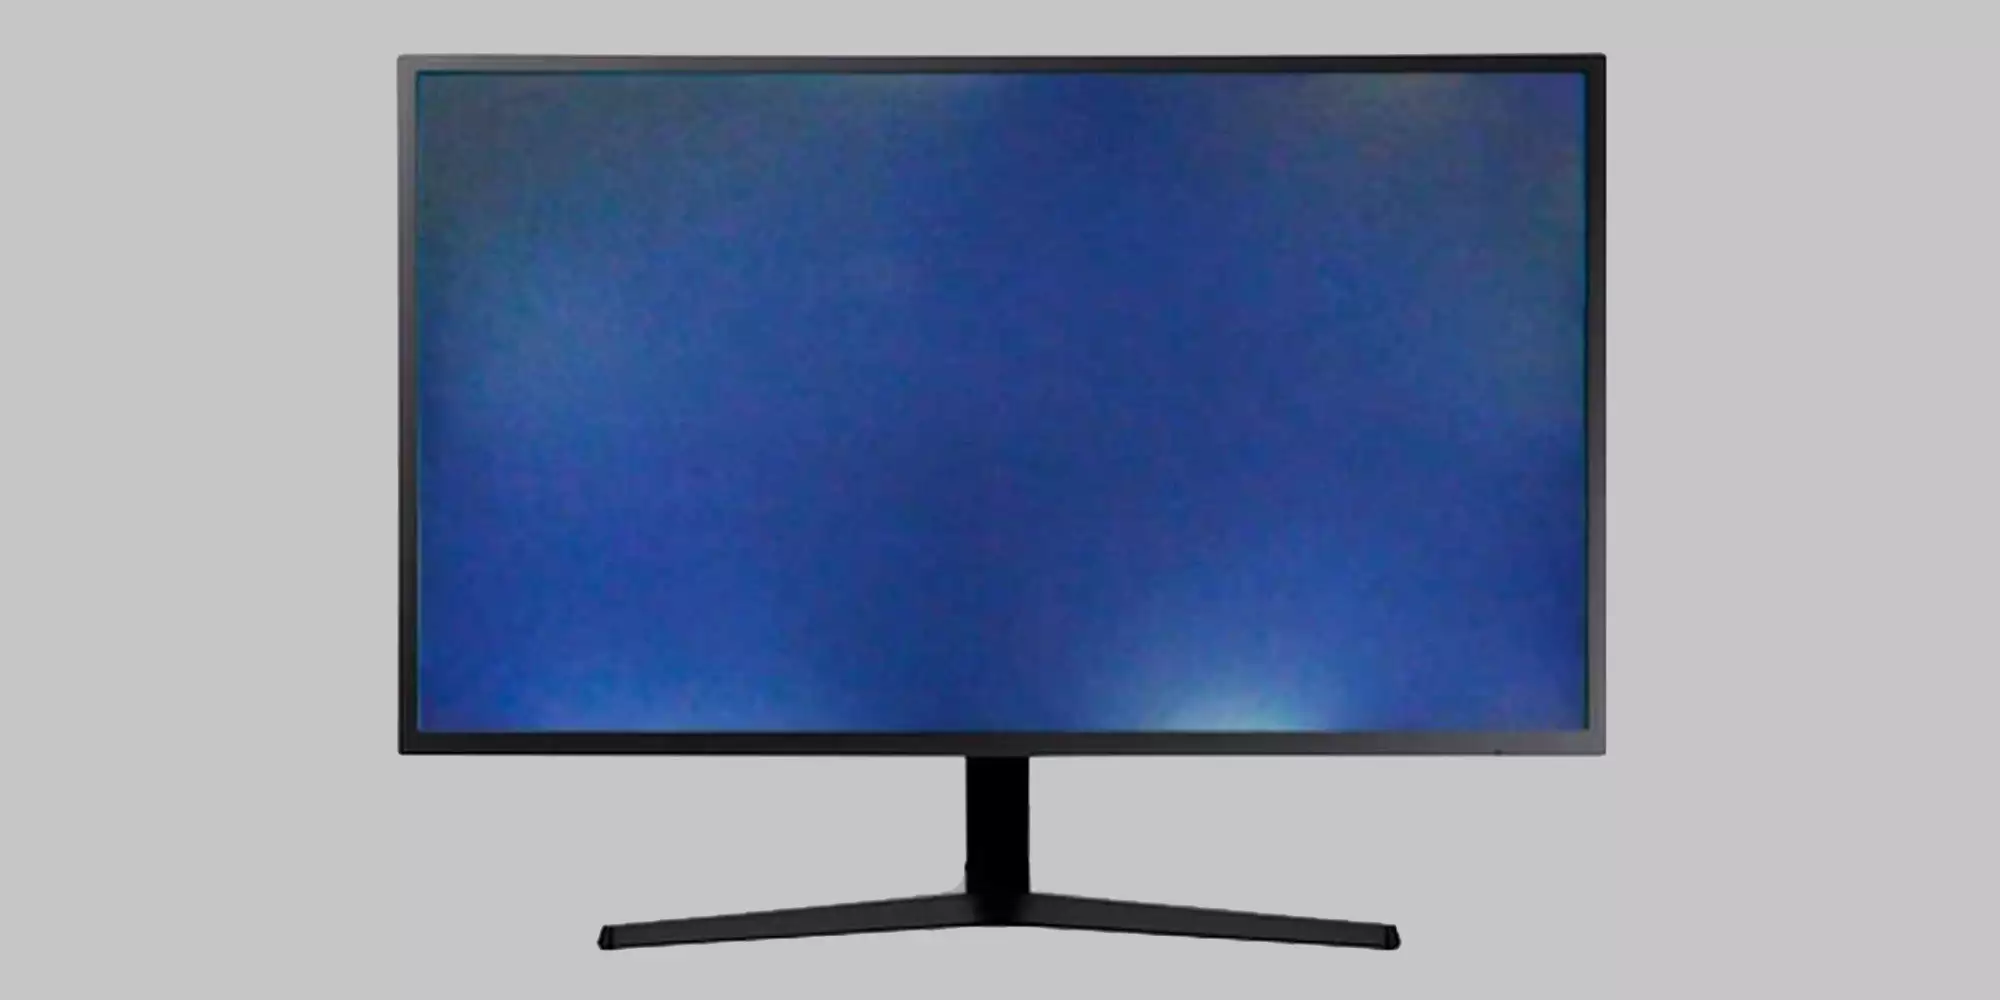 computer monitor with backlight bleed